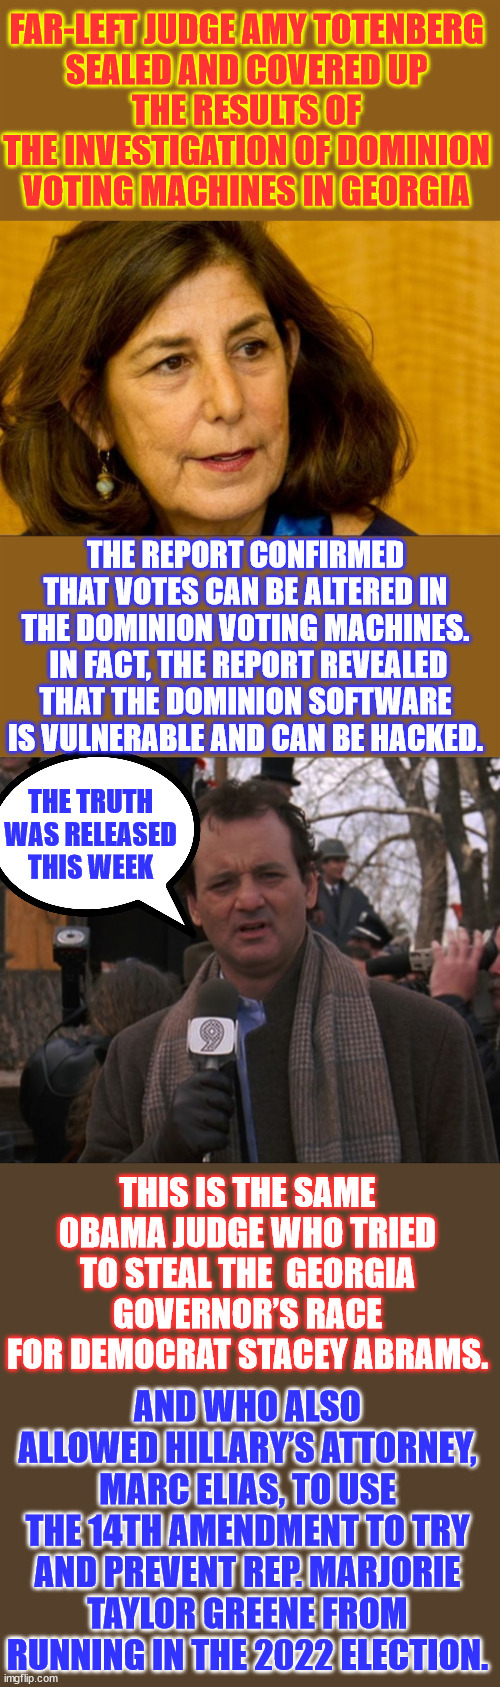 Corrupt 0bama judge tried to hide evidence about Dominion voting machines from the public. | FAR-LEFT JUDGE AMY TOTENBERG
 SEALED AND COVERED UP 
THE RESULTS OF THE INVESTIGATION OF DOMINION VOTING MACHINES IN GEORGIA; THE REPORT CONFIRMED THAT VOTES CAN BE ALTERED IN THE DOMINION VOTING MACHINES.  IN FACT, THE REPORT REVEALED THAT THE DOMINION SOFTWARE IS VULNERABLE AND CAN BE HACKED. THE TRUTH WAS RELEASED THIS WEEK; THIS IS THE SAME 0BAMA JUDGE WHO TRIED TO STEAL THE  GEORGIA GOVERNOR’S RACE FOR DEMOCRAT STACEY ABRAMS. AND WHO ALSO ALLOWED HILLARY’S ATTORNEY, MARC ELIAS, TO USE THE 14TH AMENDMENT TO TRY AND PREVENT REP. MARJORIE TAYLOR GREENE FROM RUNNING IN THE 2022 ELECTION. | image tagged in proof,voting machines,can be hacked to change votes,using just a pen,brad raffensperger knew | made w/ Imgflip meme maker